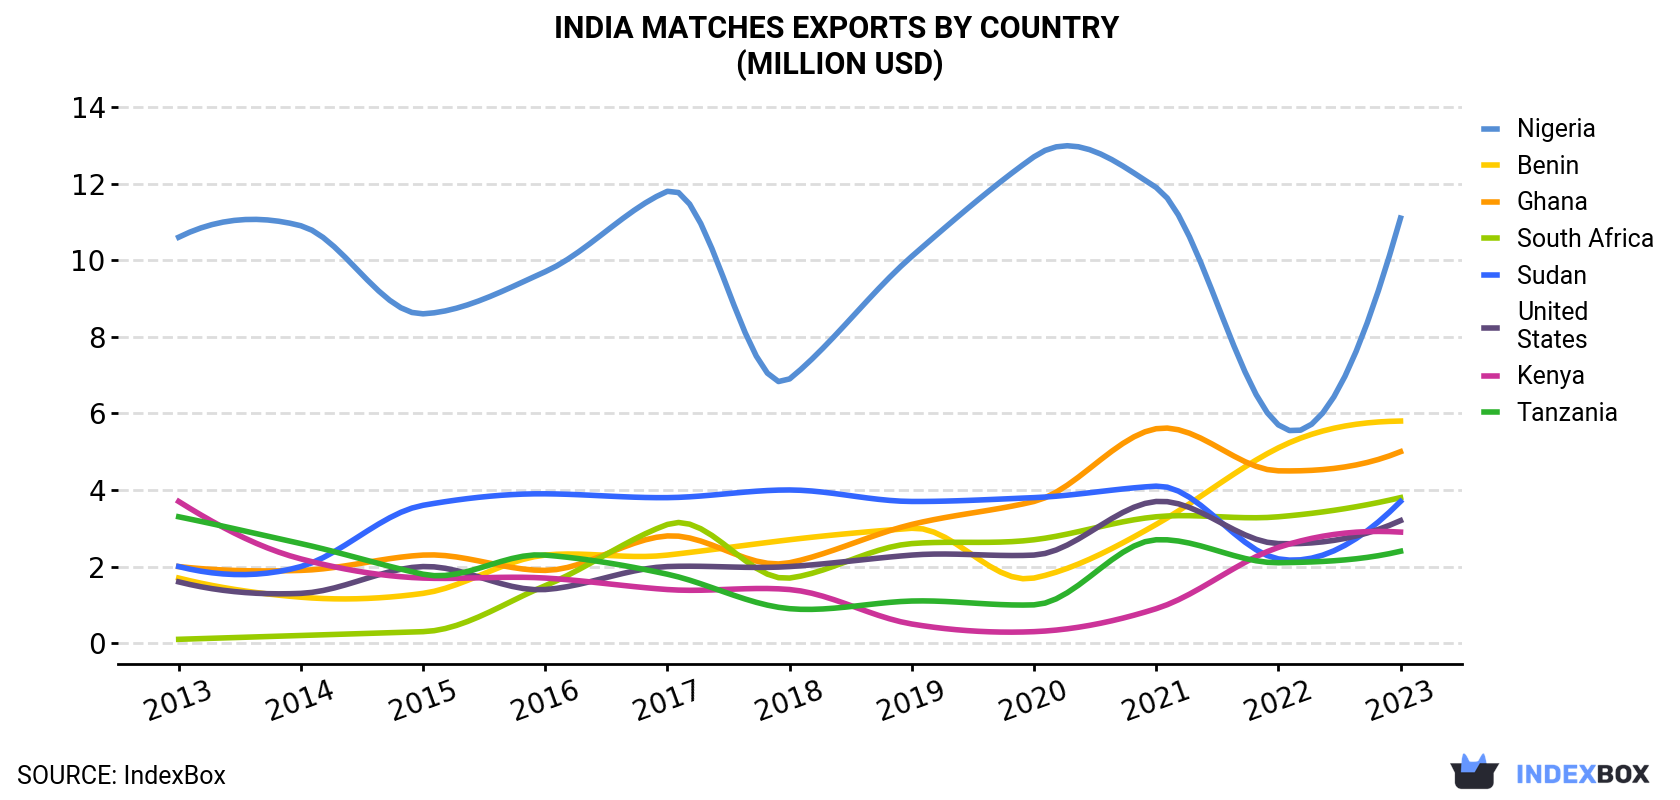 India Matches Exports By Country (Million USD)